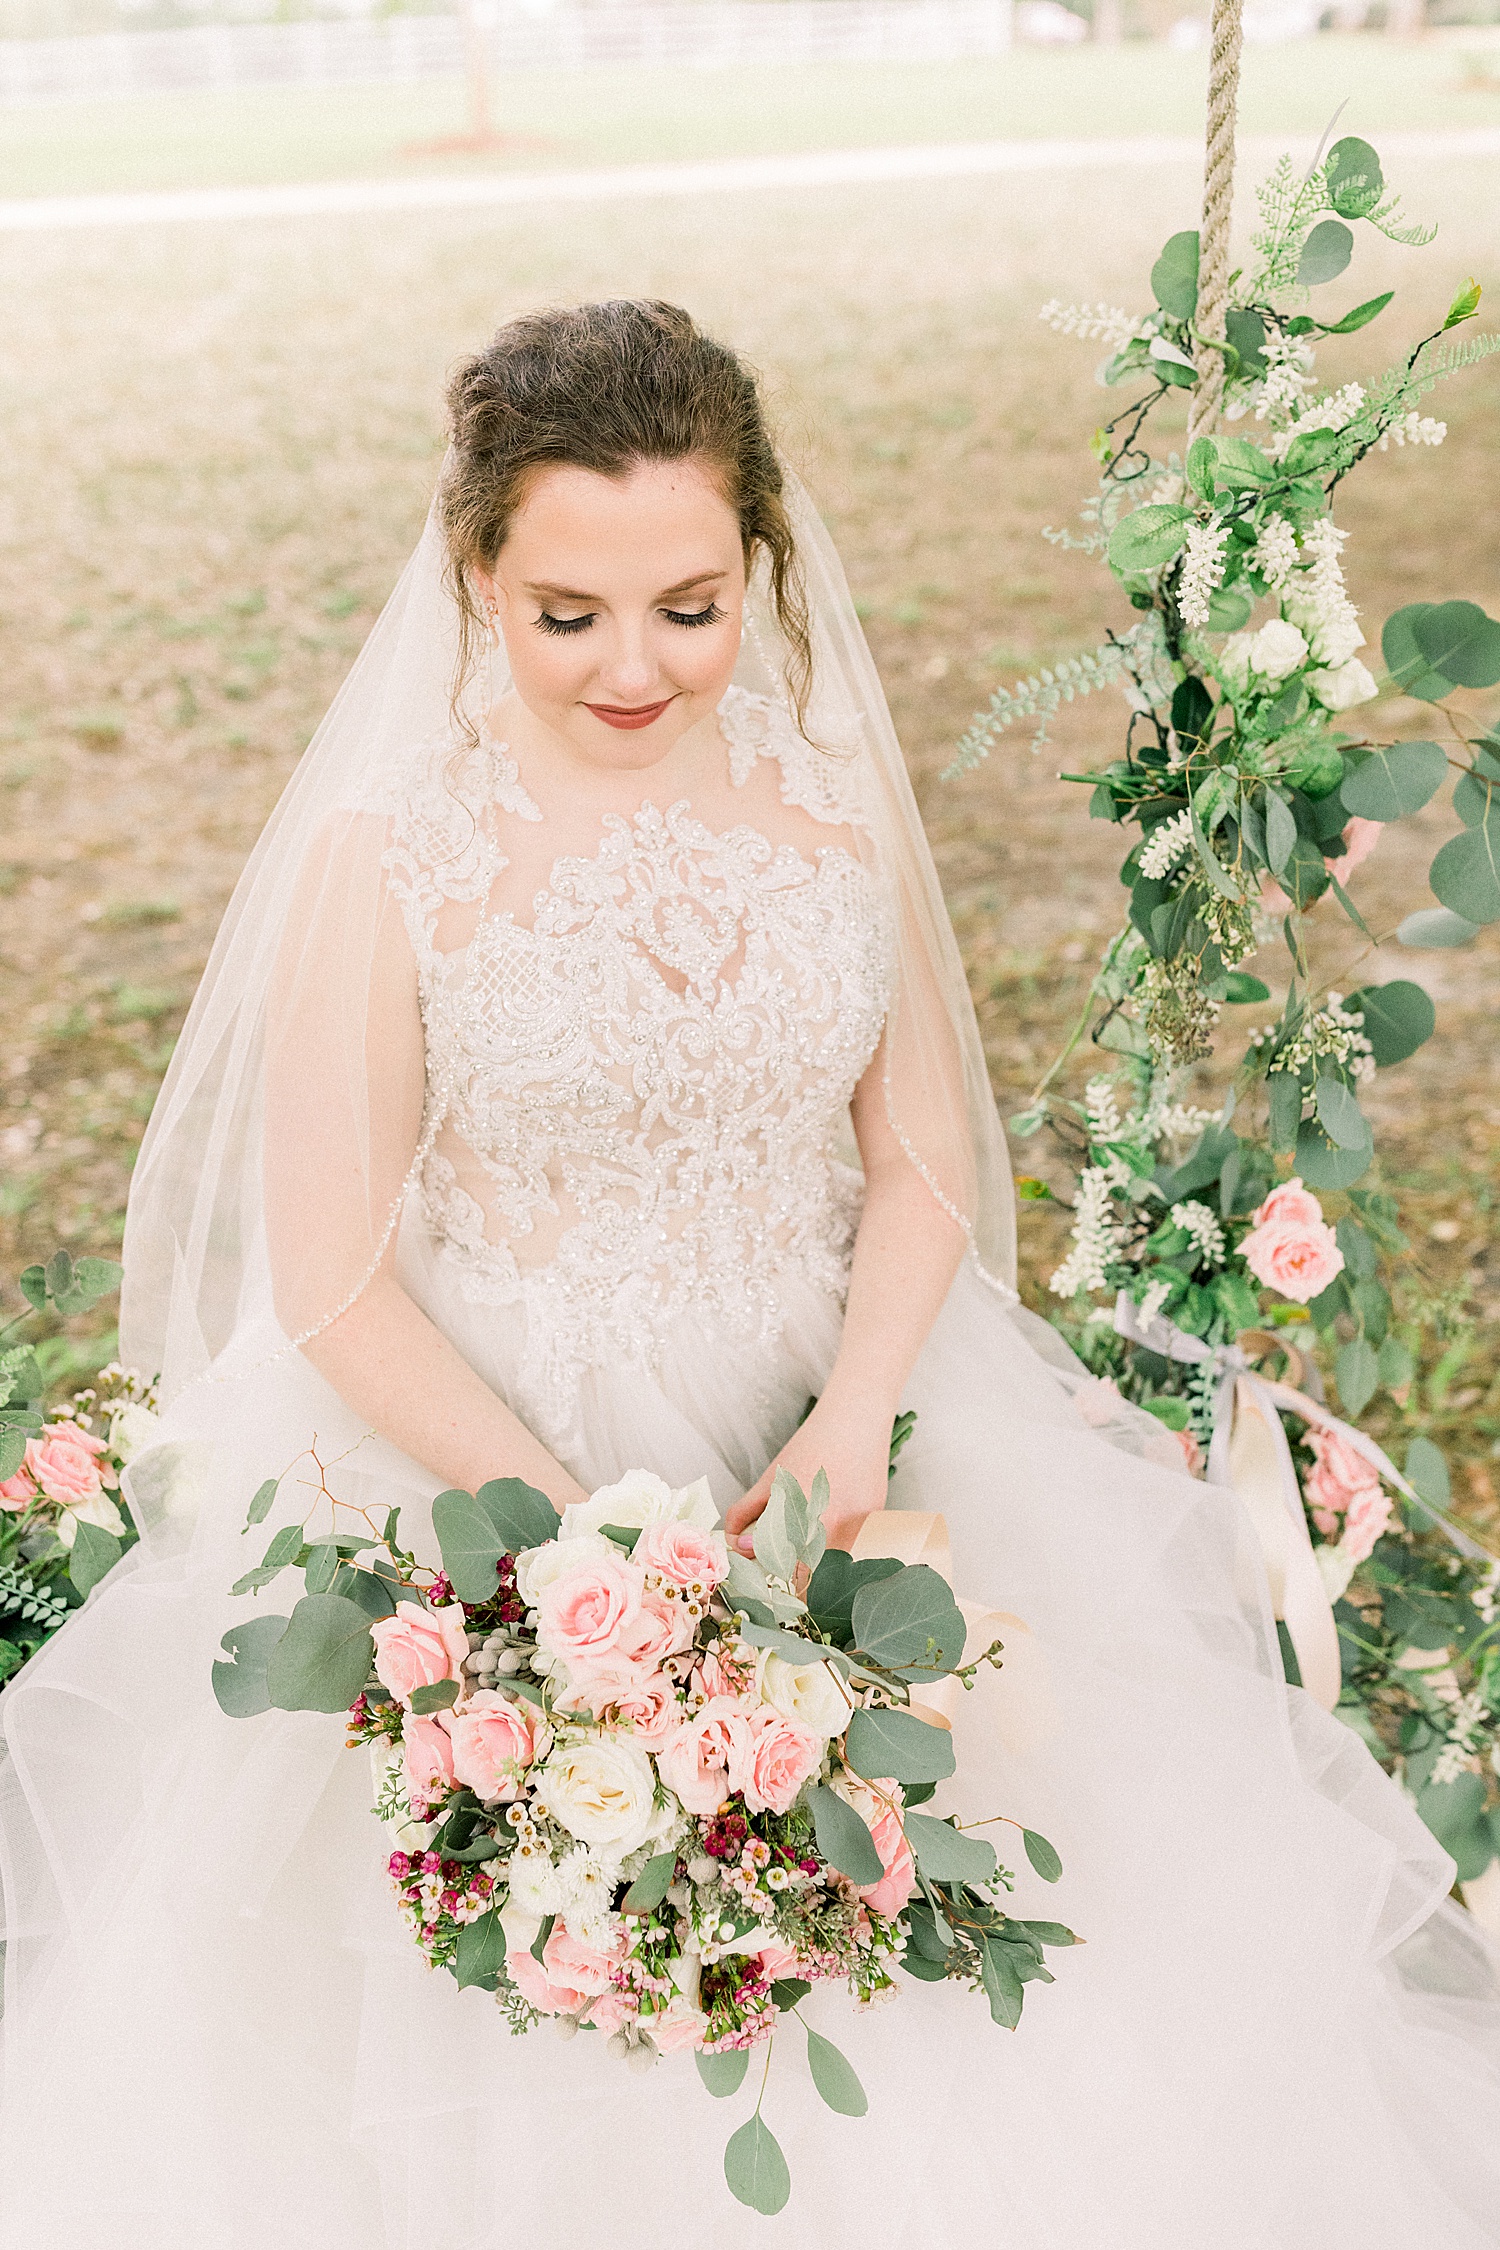 bride details as she sits on swing hanging from tree